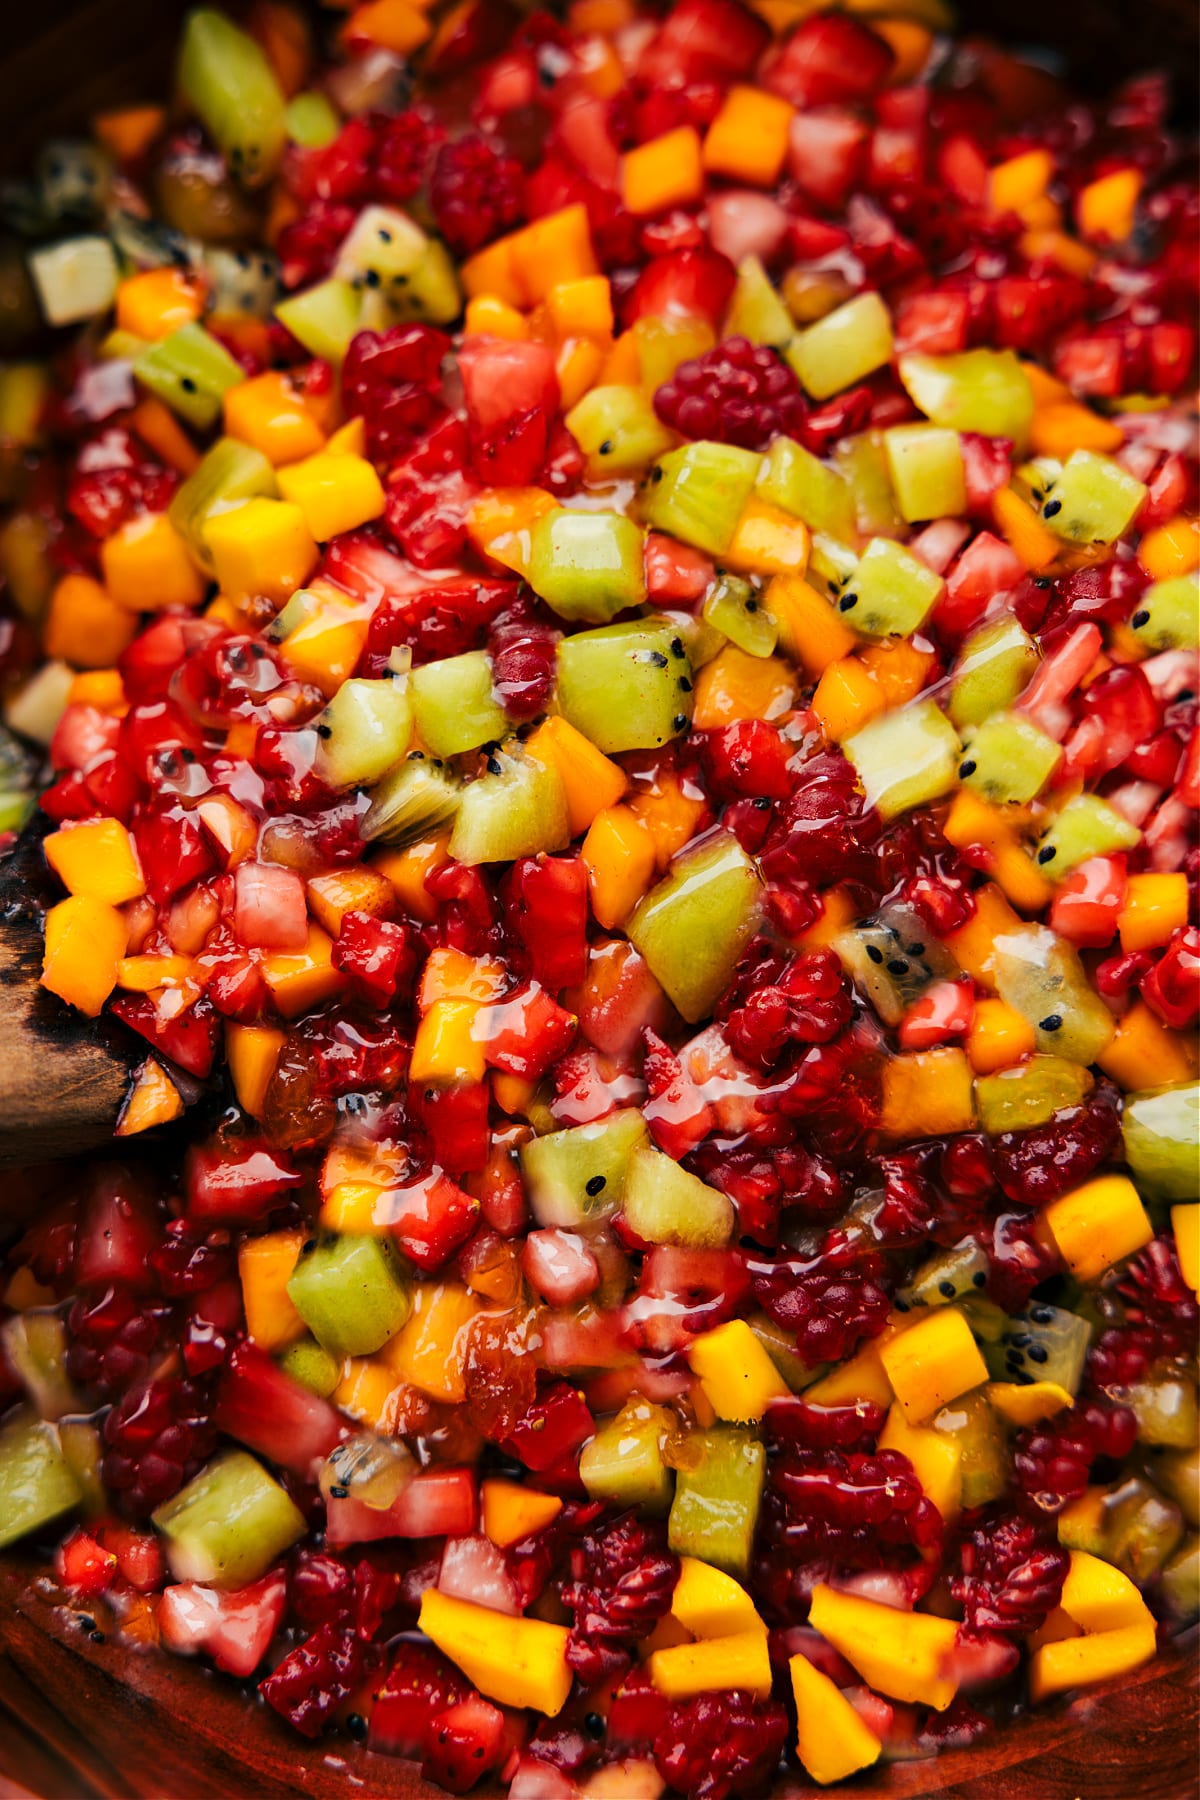 The fruit salsa in a bowl ready to be enjoyed with some cinnamon chips.